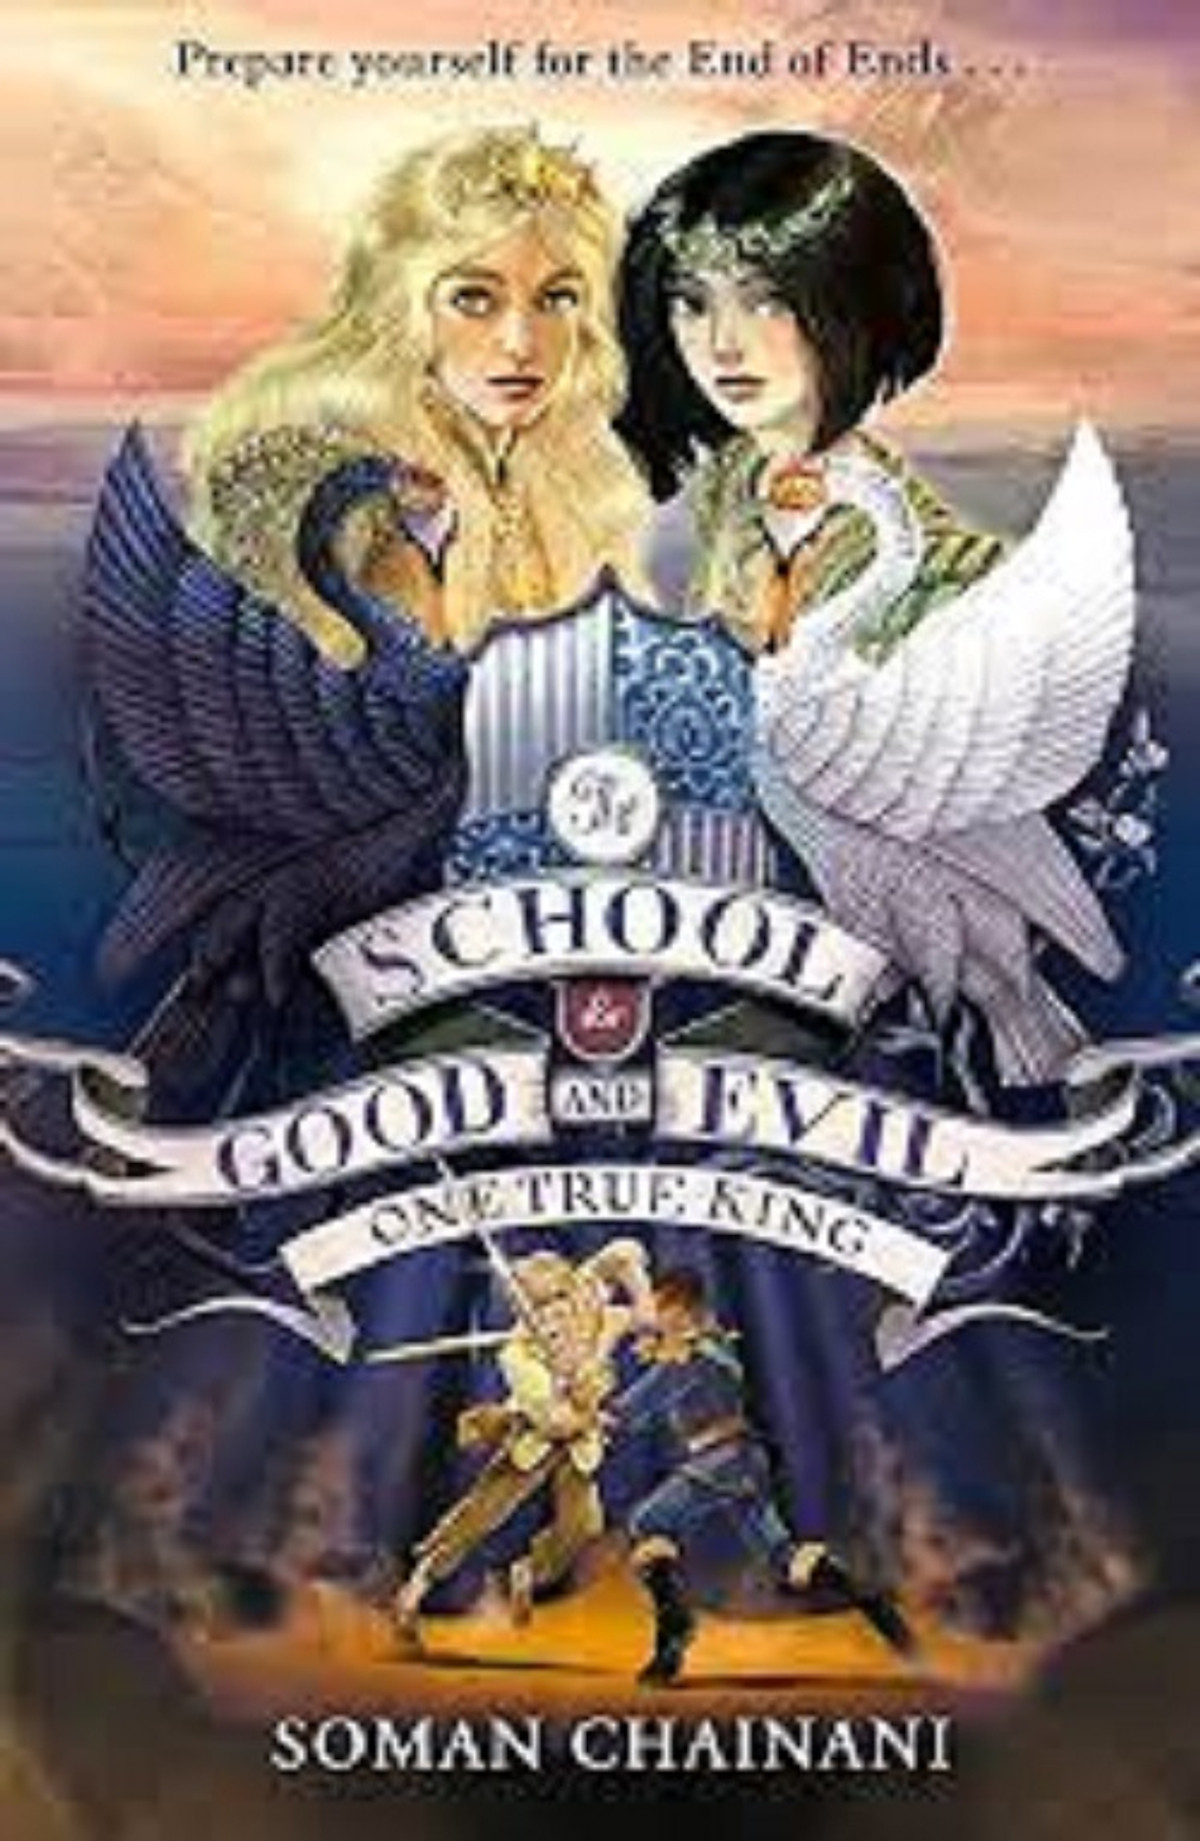 One True King: The School for Good and Evil, Book 6